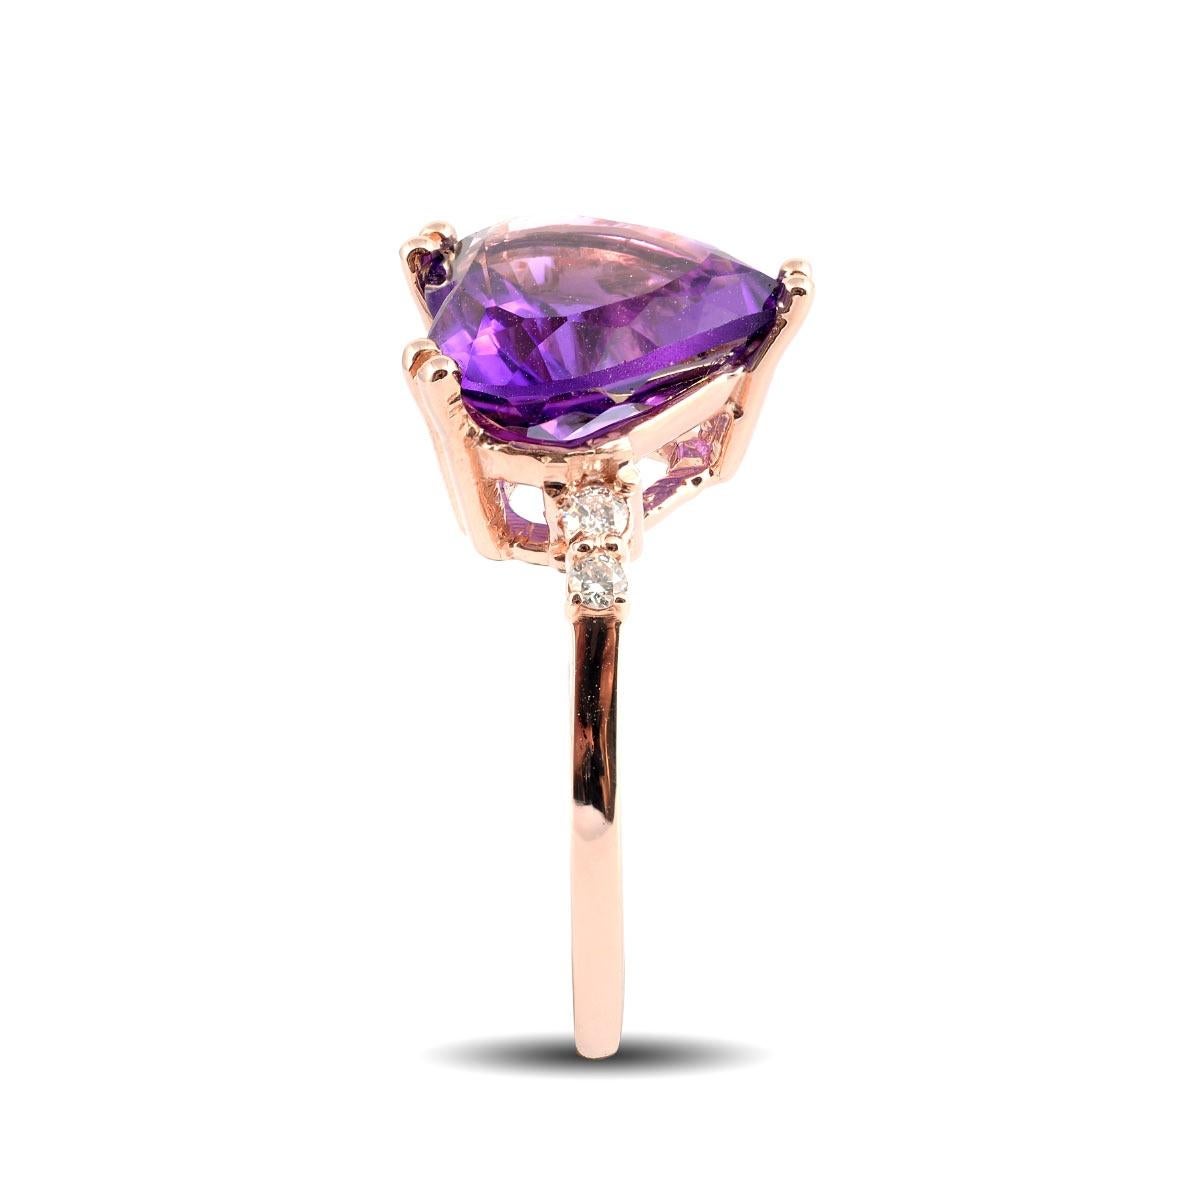 Mixed Cut 3.61 Carats Amethyst Diamonds set in 14K Rose Gold Ring For Sale